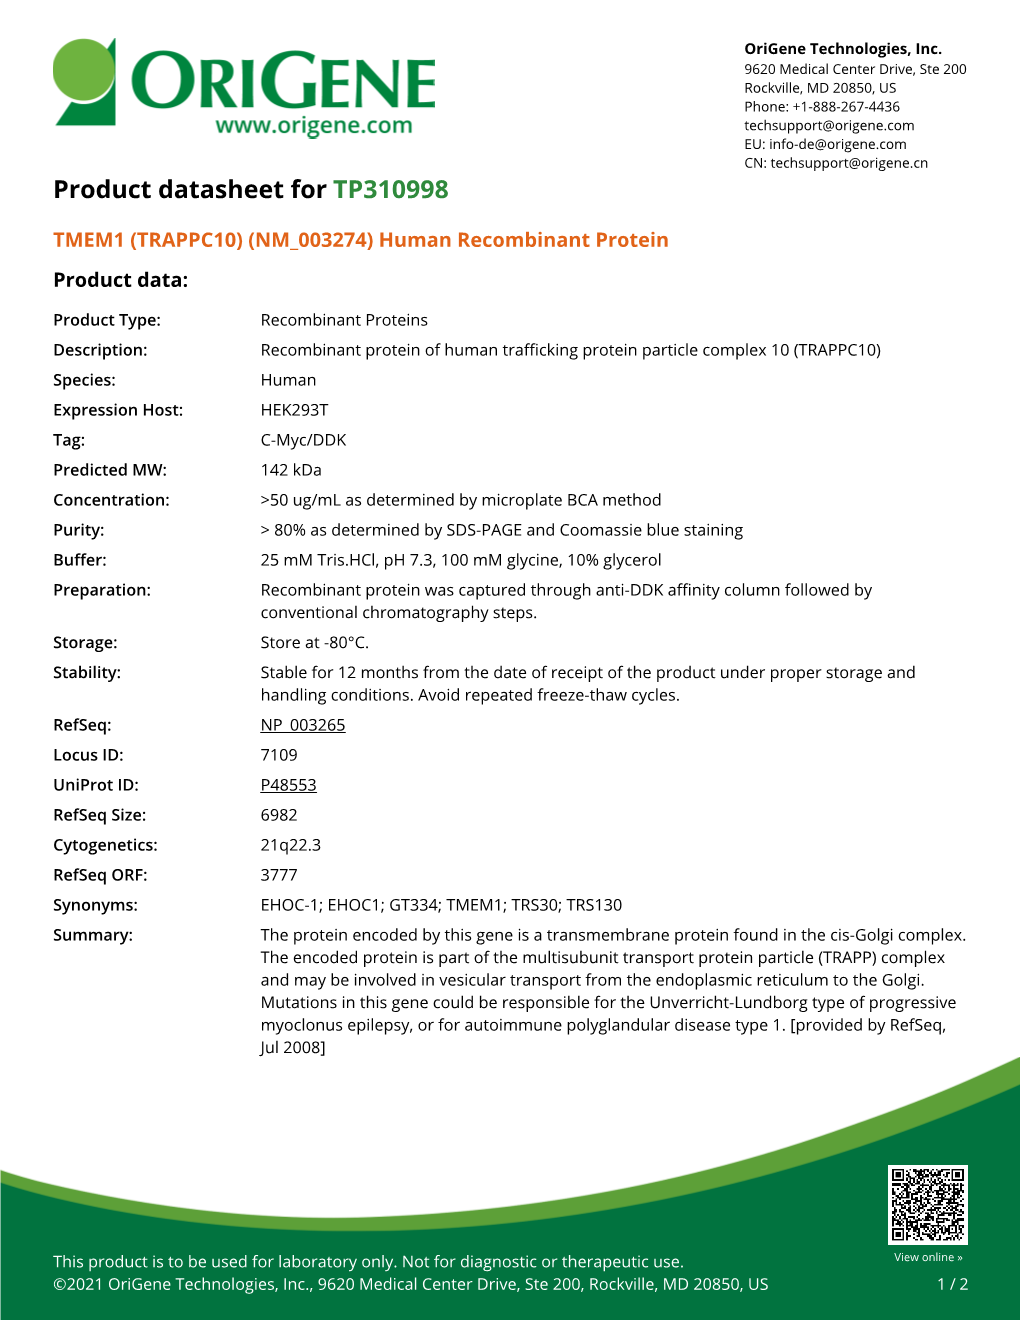 TMEM1 (TRAPPC10) (NM 003274) Human Recombinant Protein Product Data